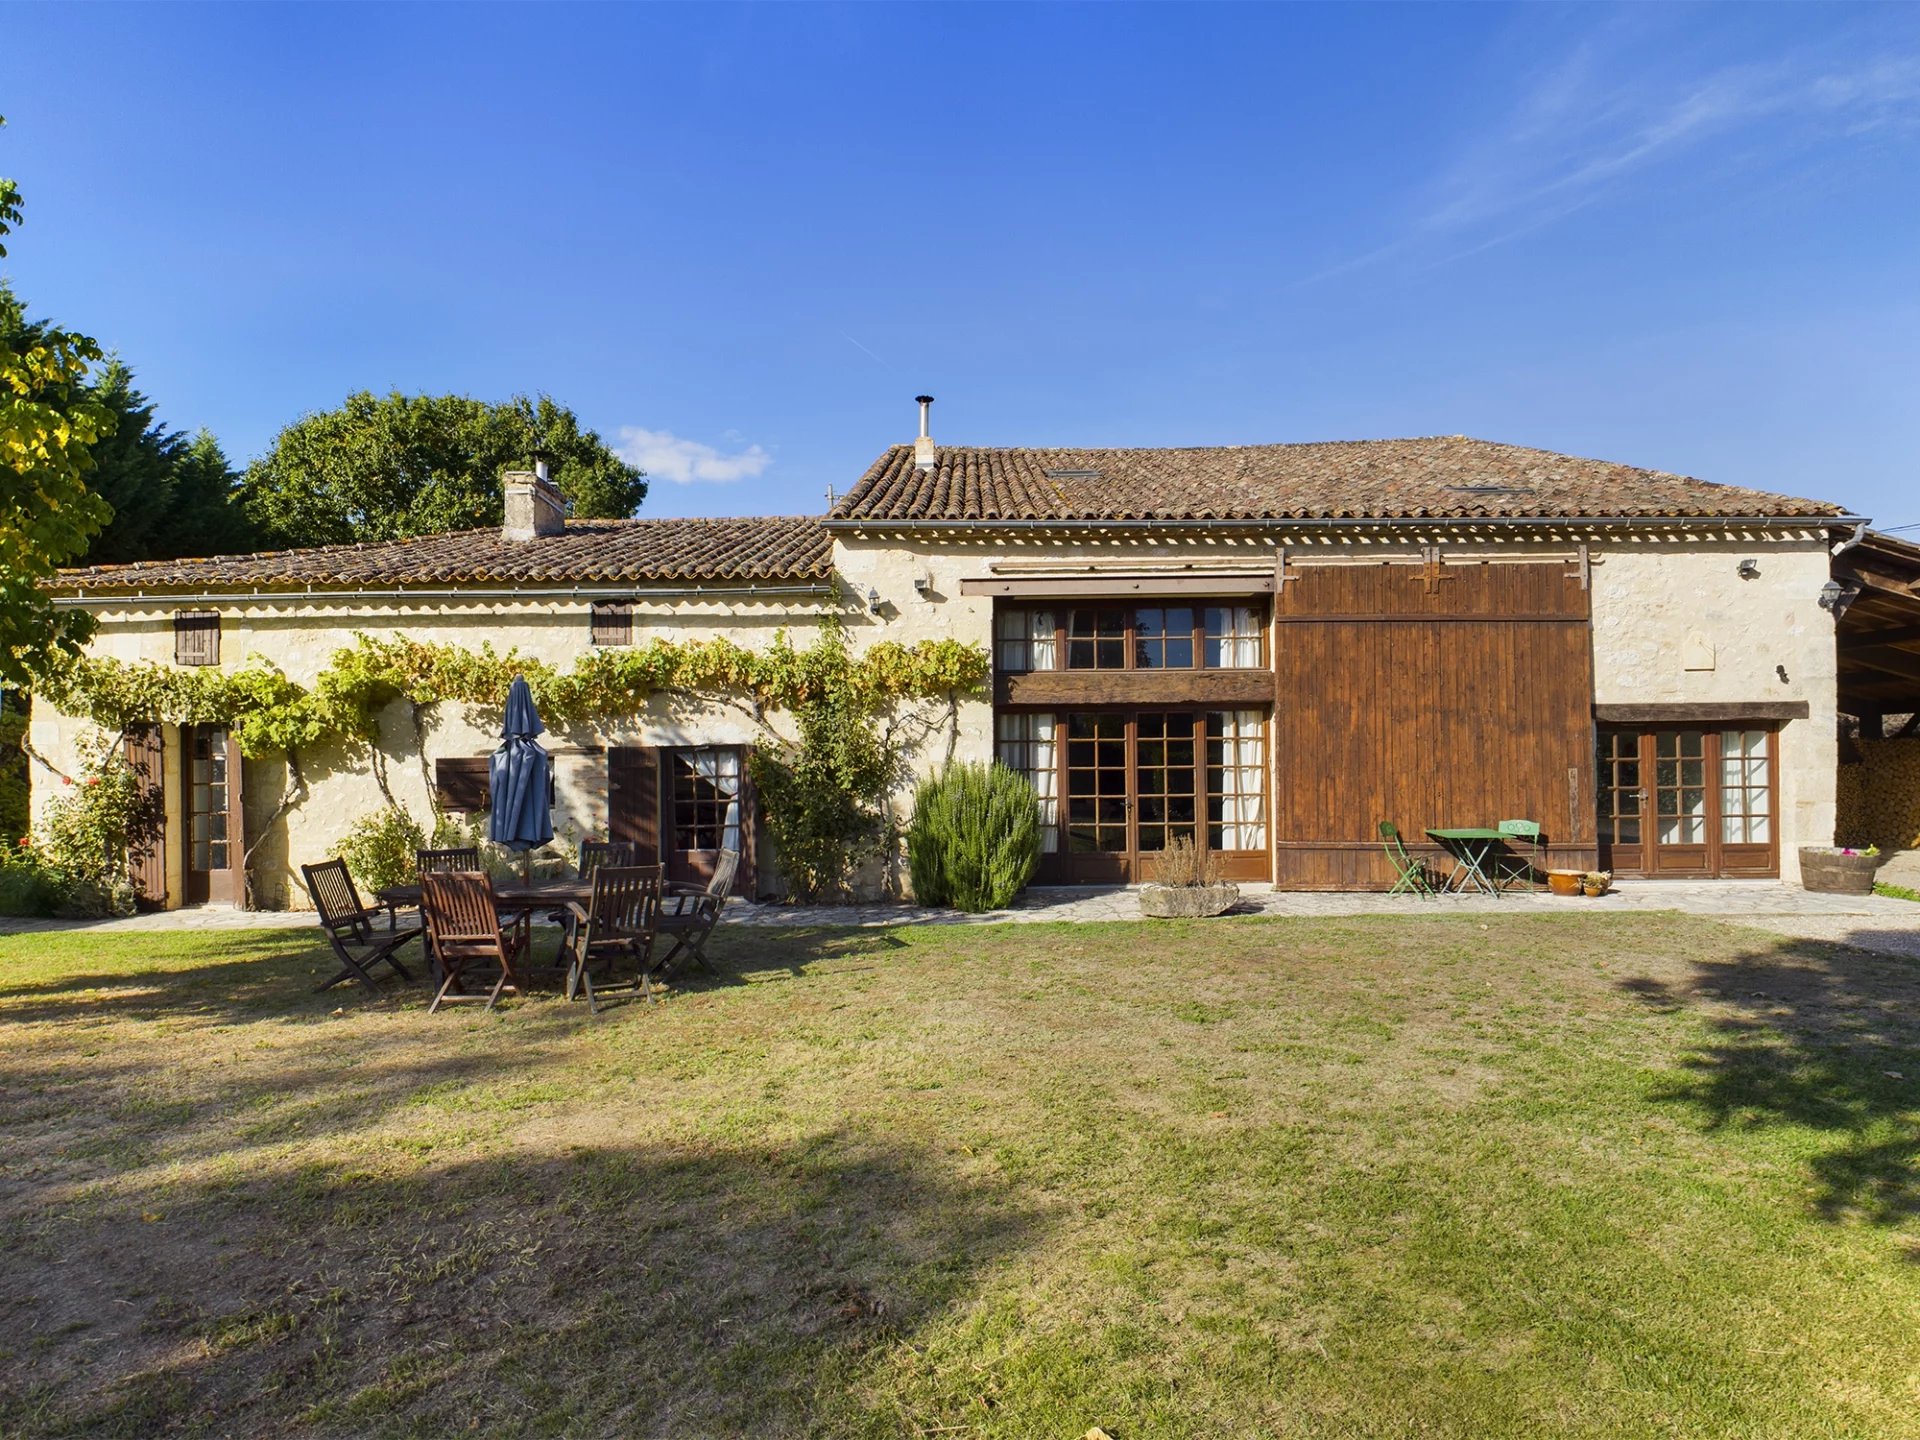 Lovely 5 Bedroom house with 2 Cottages and pool, just 1 hour from Bordeaux and 30 minutes from Berge